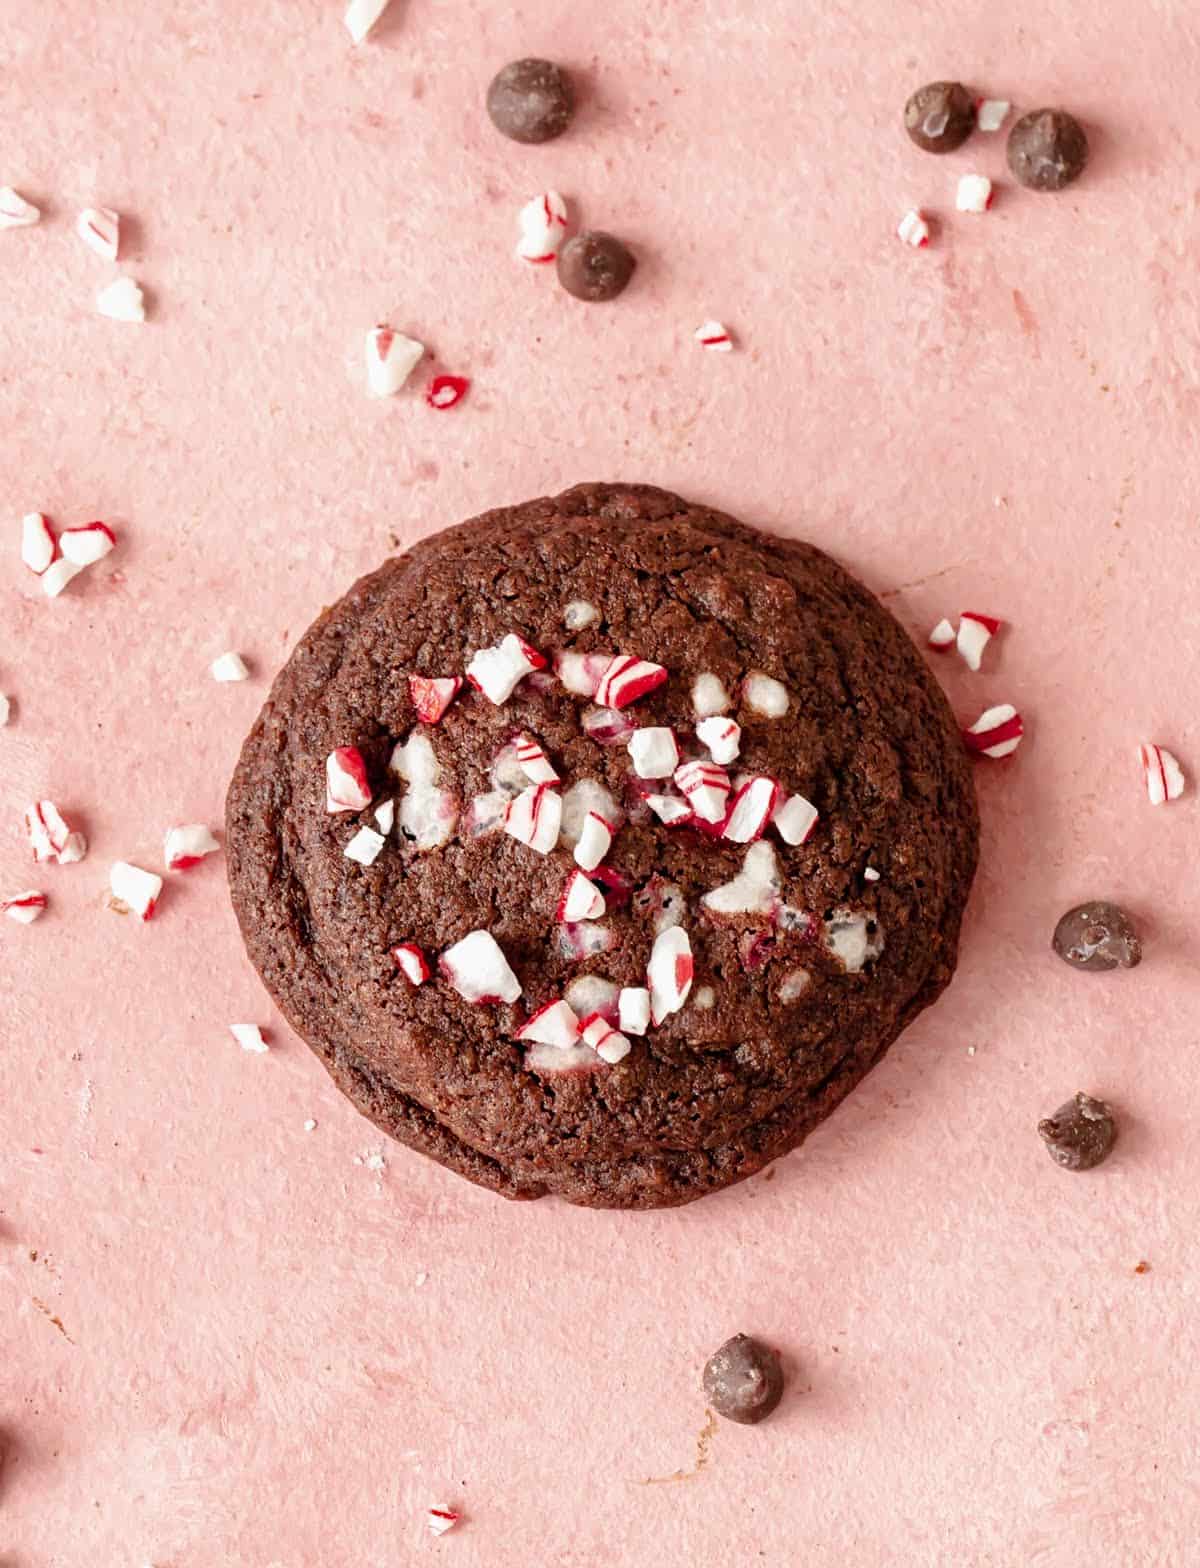 Top view of single chocolate peppermint cookie on pink surface, loose candy and chips around